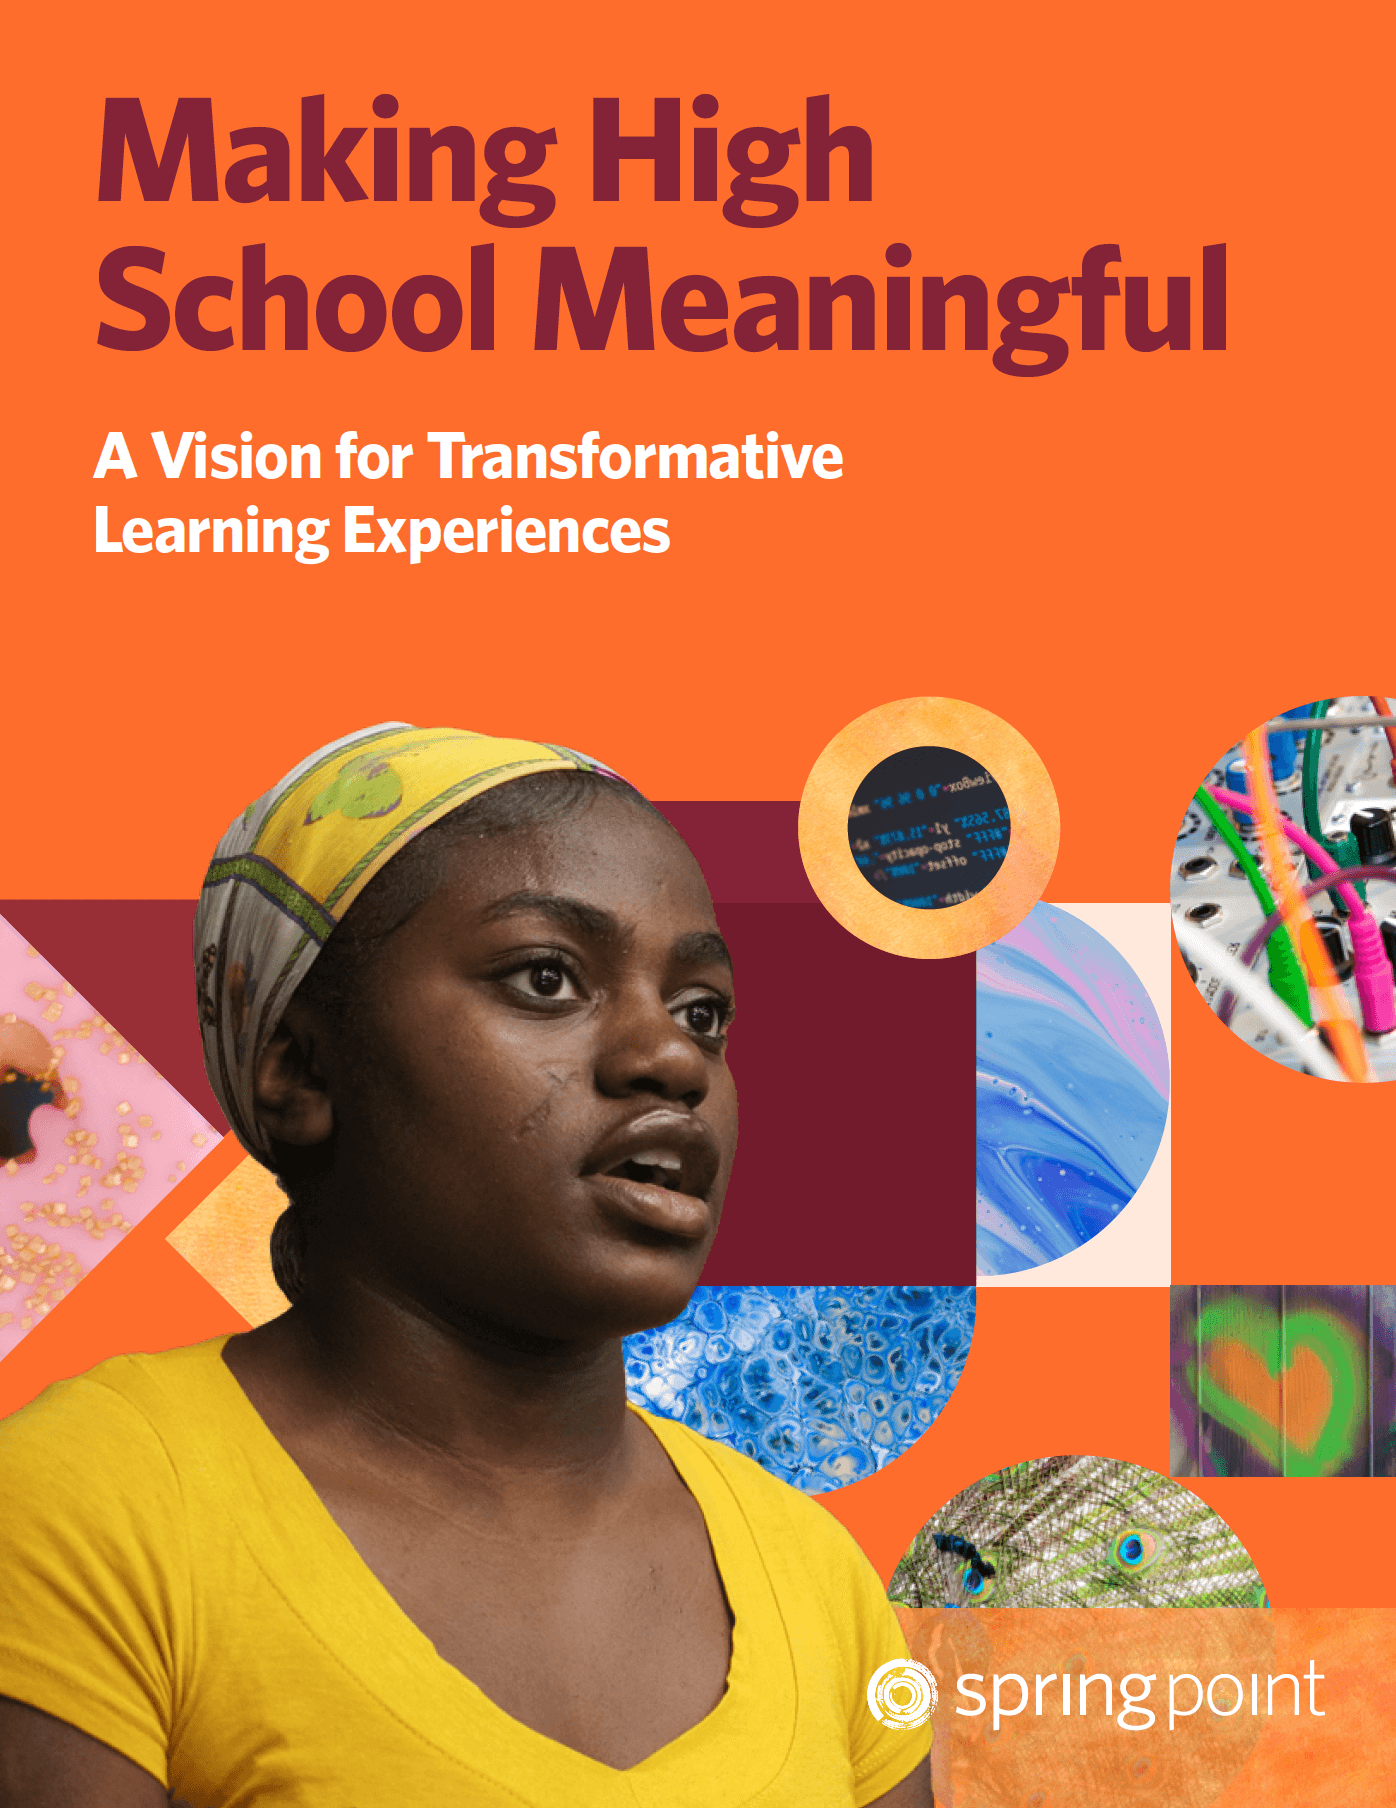 The paper cover of 'Making High School Meaningful' with a student wearing a yellow shirt